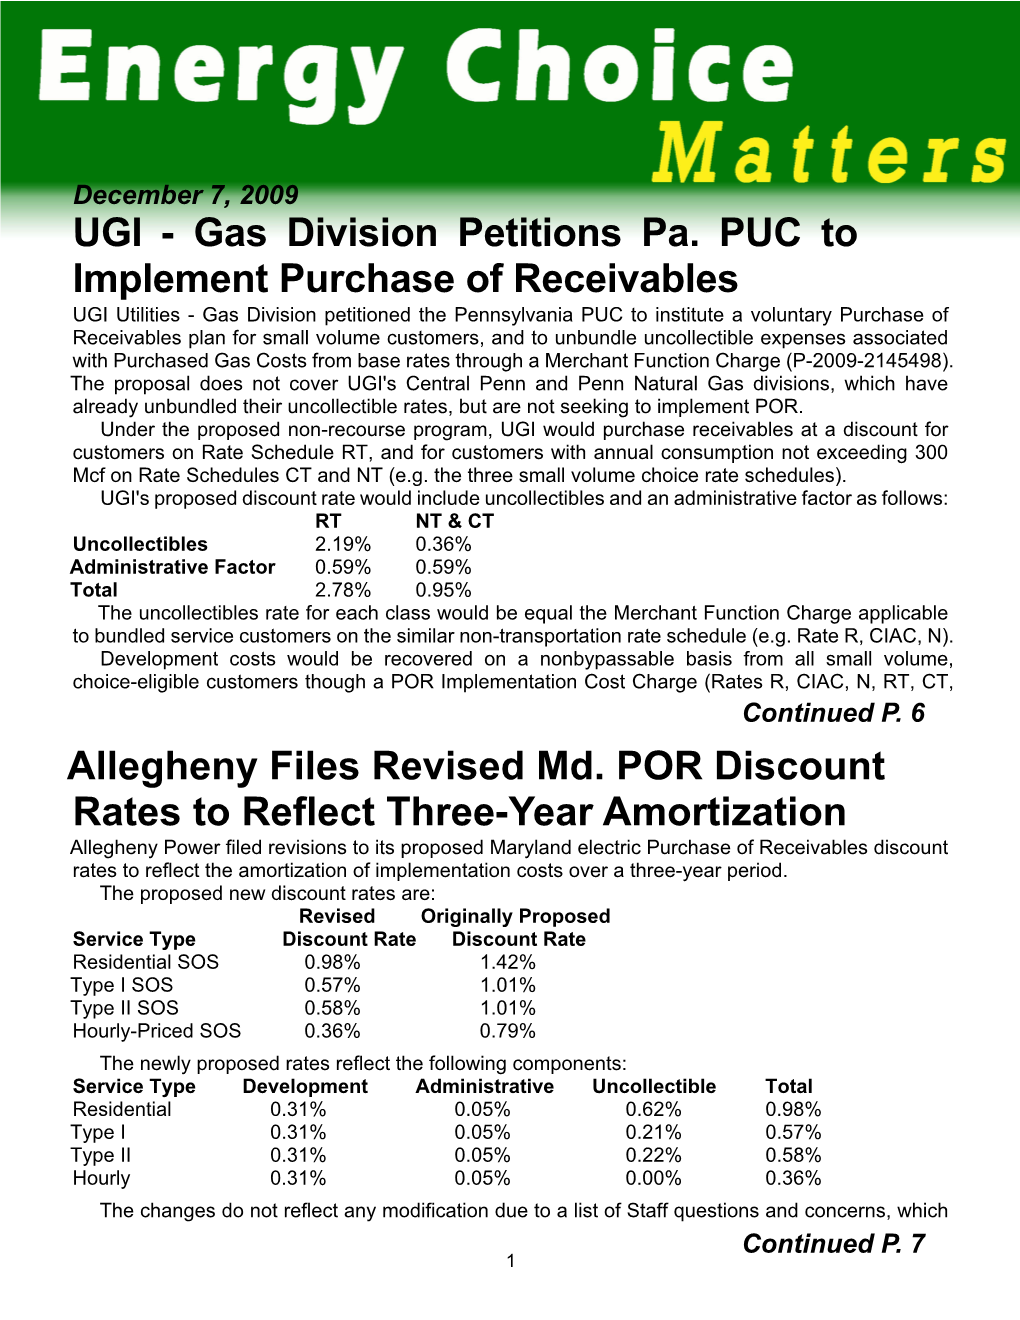 UGI - Gas Division Petitions Pa